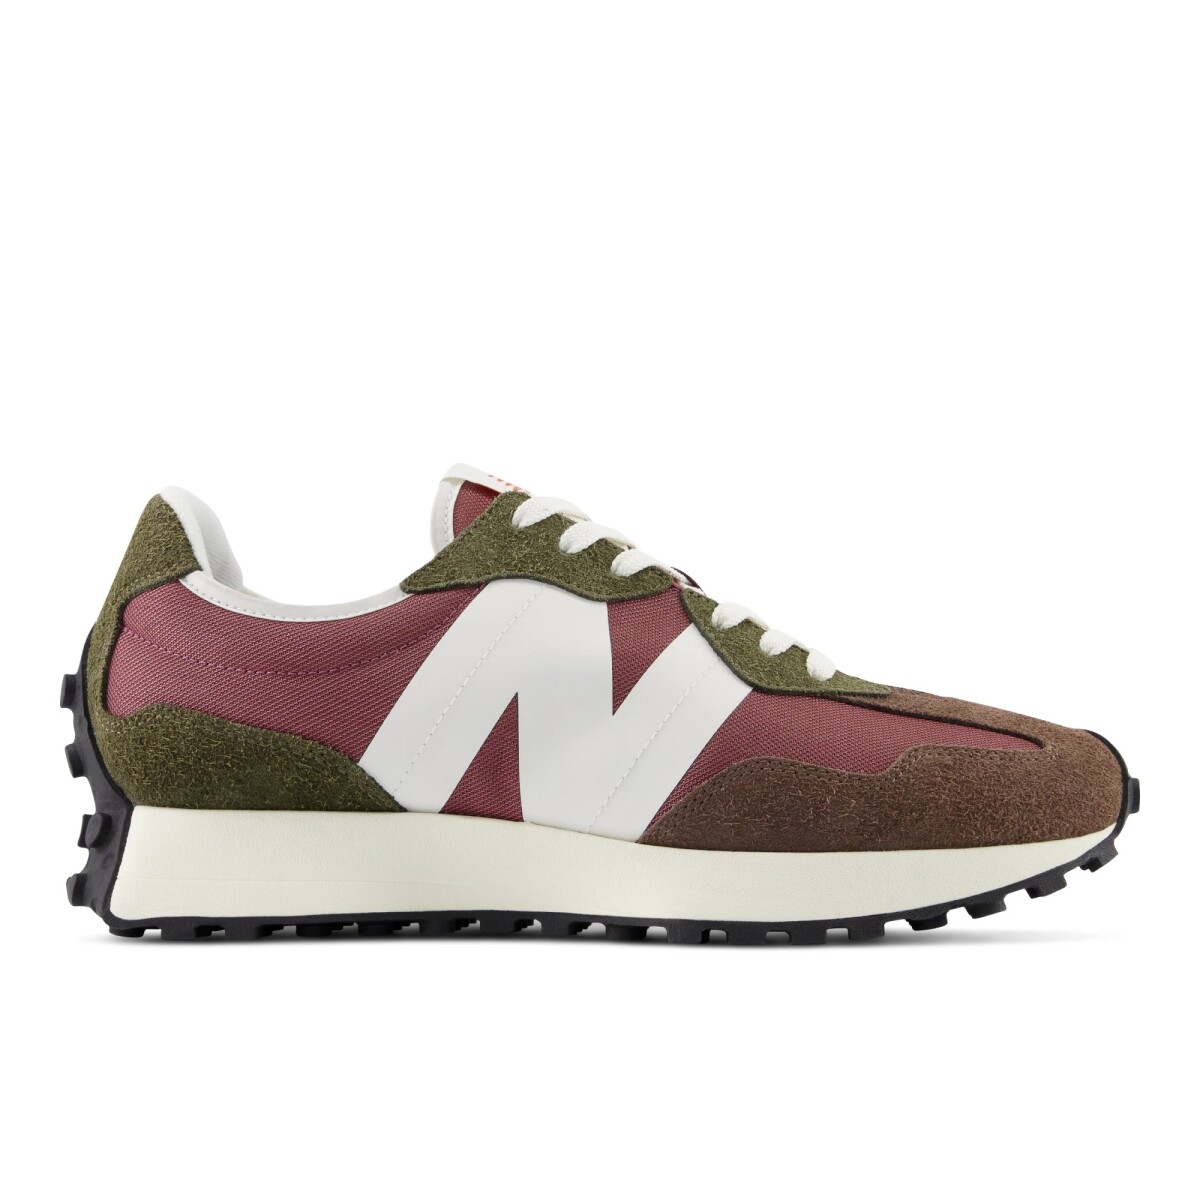 Championes New Balance de Hombre - 327 - MS327HD - WASHED BURGUNDY 